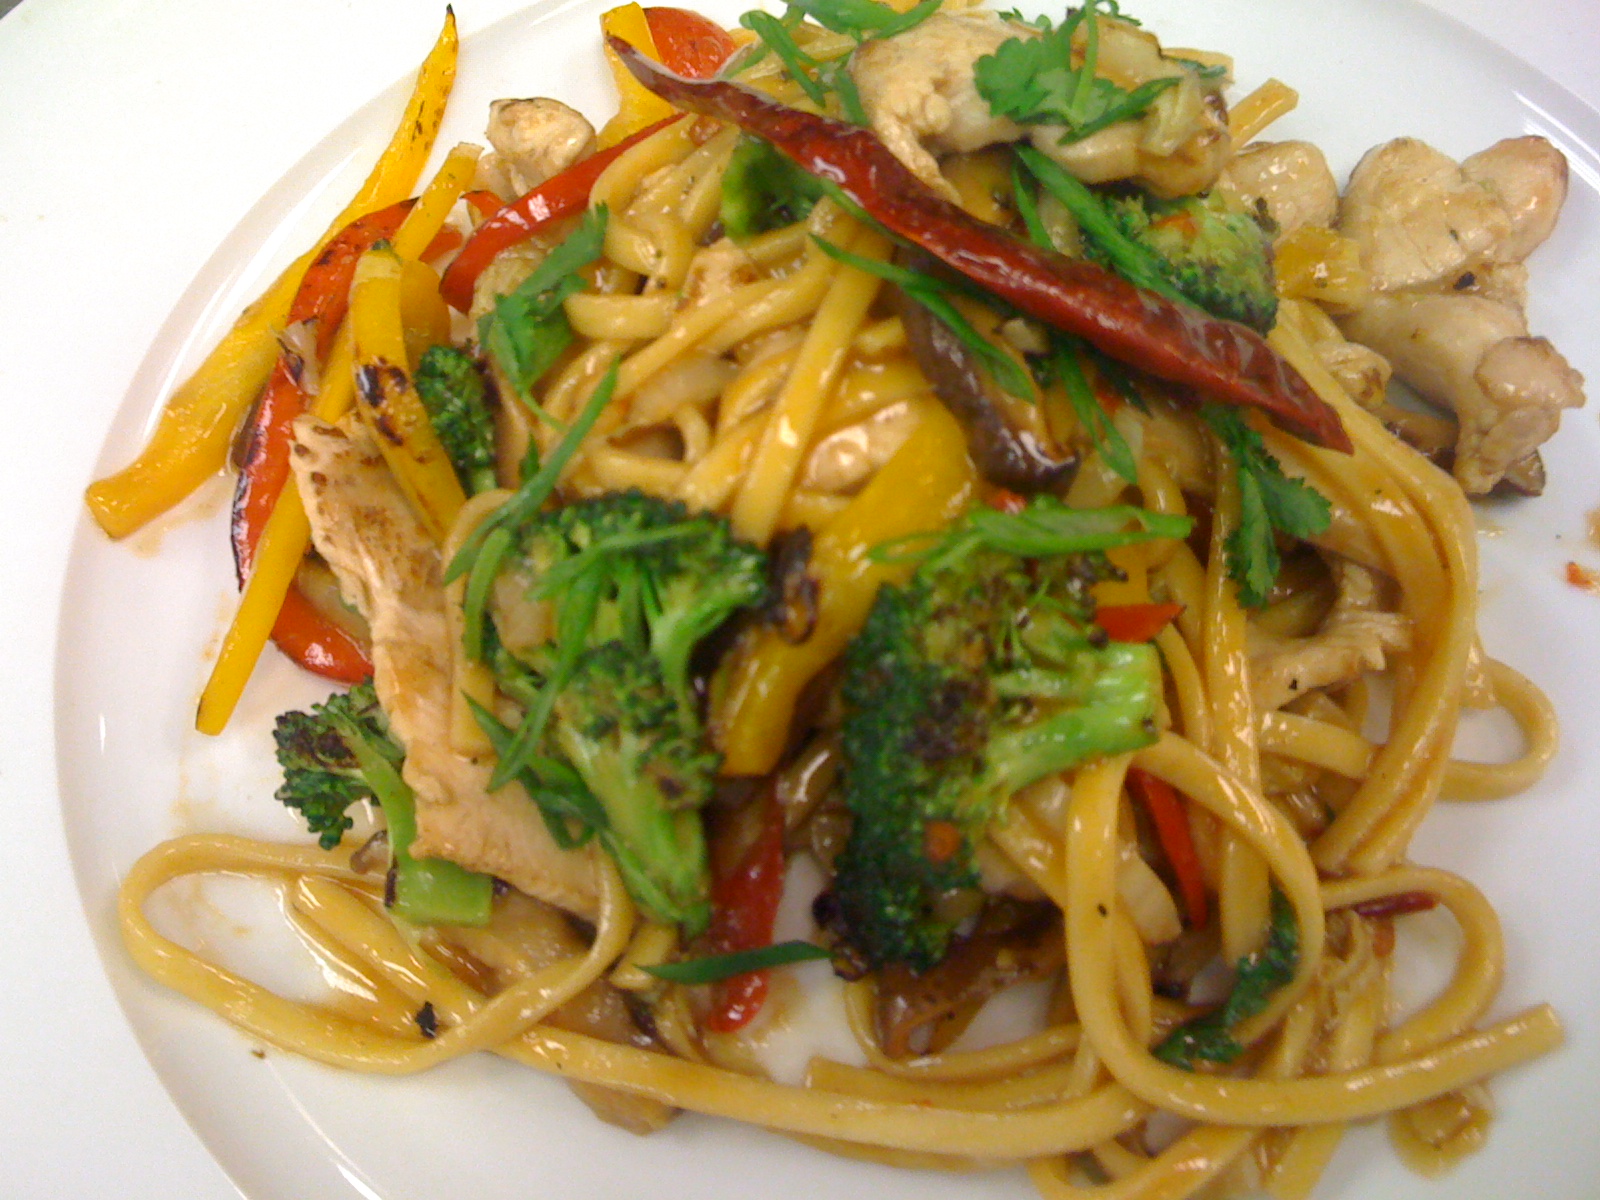 My Kitchen: Stir-Fried Chicken and Vegetables with Lo Mein Noodles